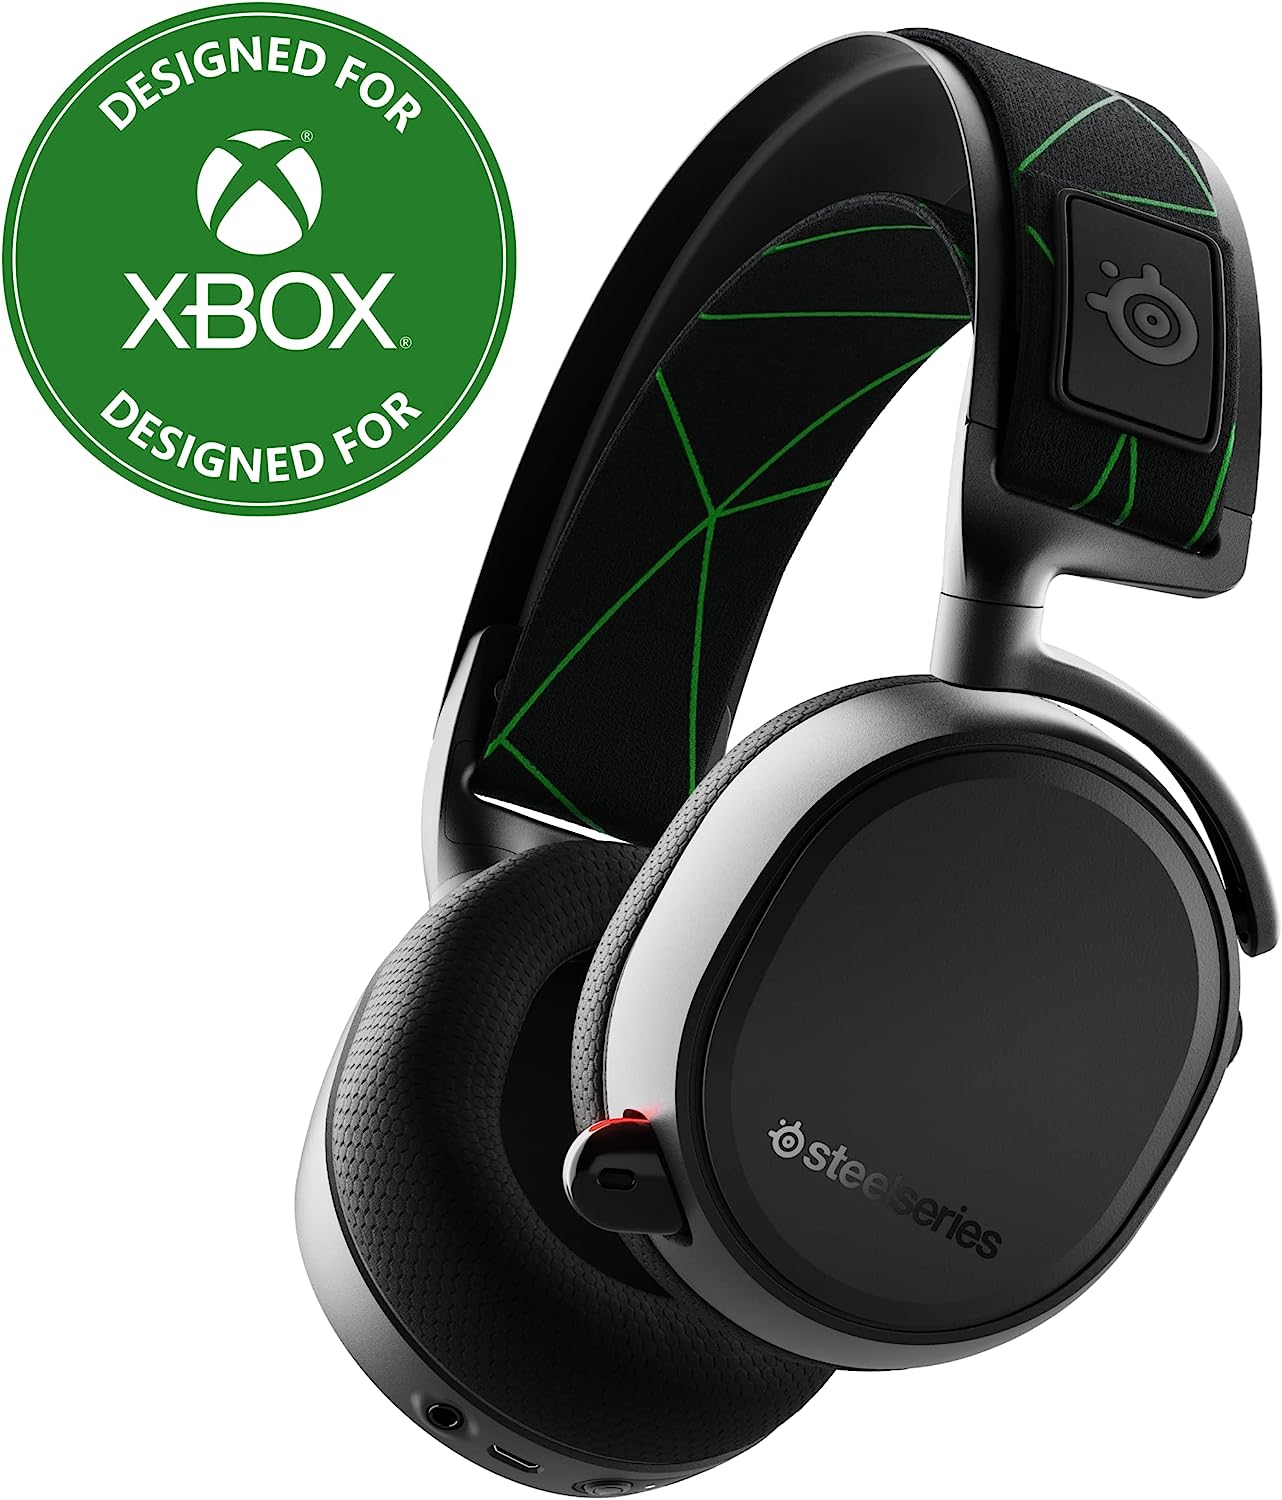 SteelSeries Arctis 9X Wireless Gaming Headset – Integrated-Xbox Wireless + Bluetooth – 20+ Hour Battery Life – for-Xbox One and Series X